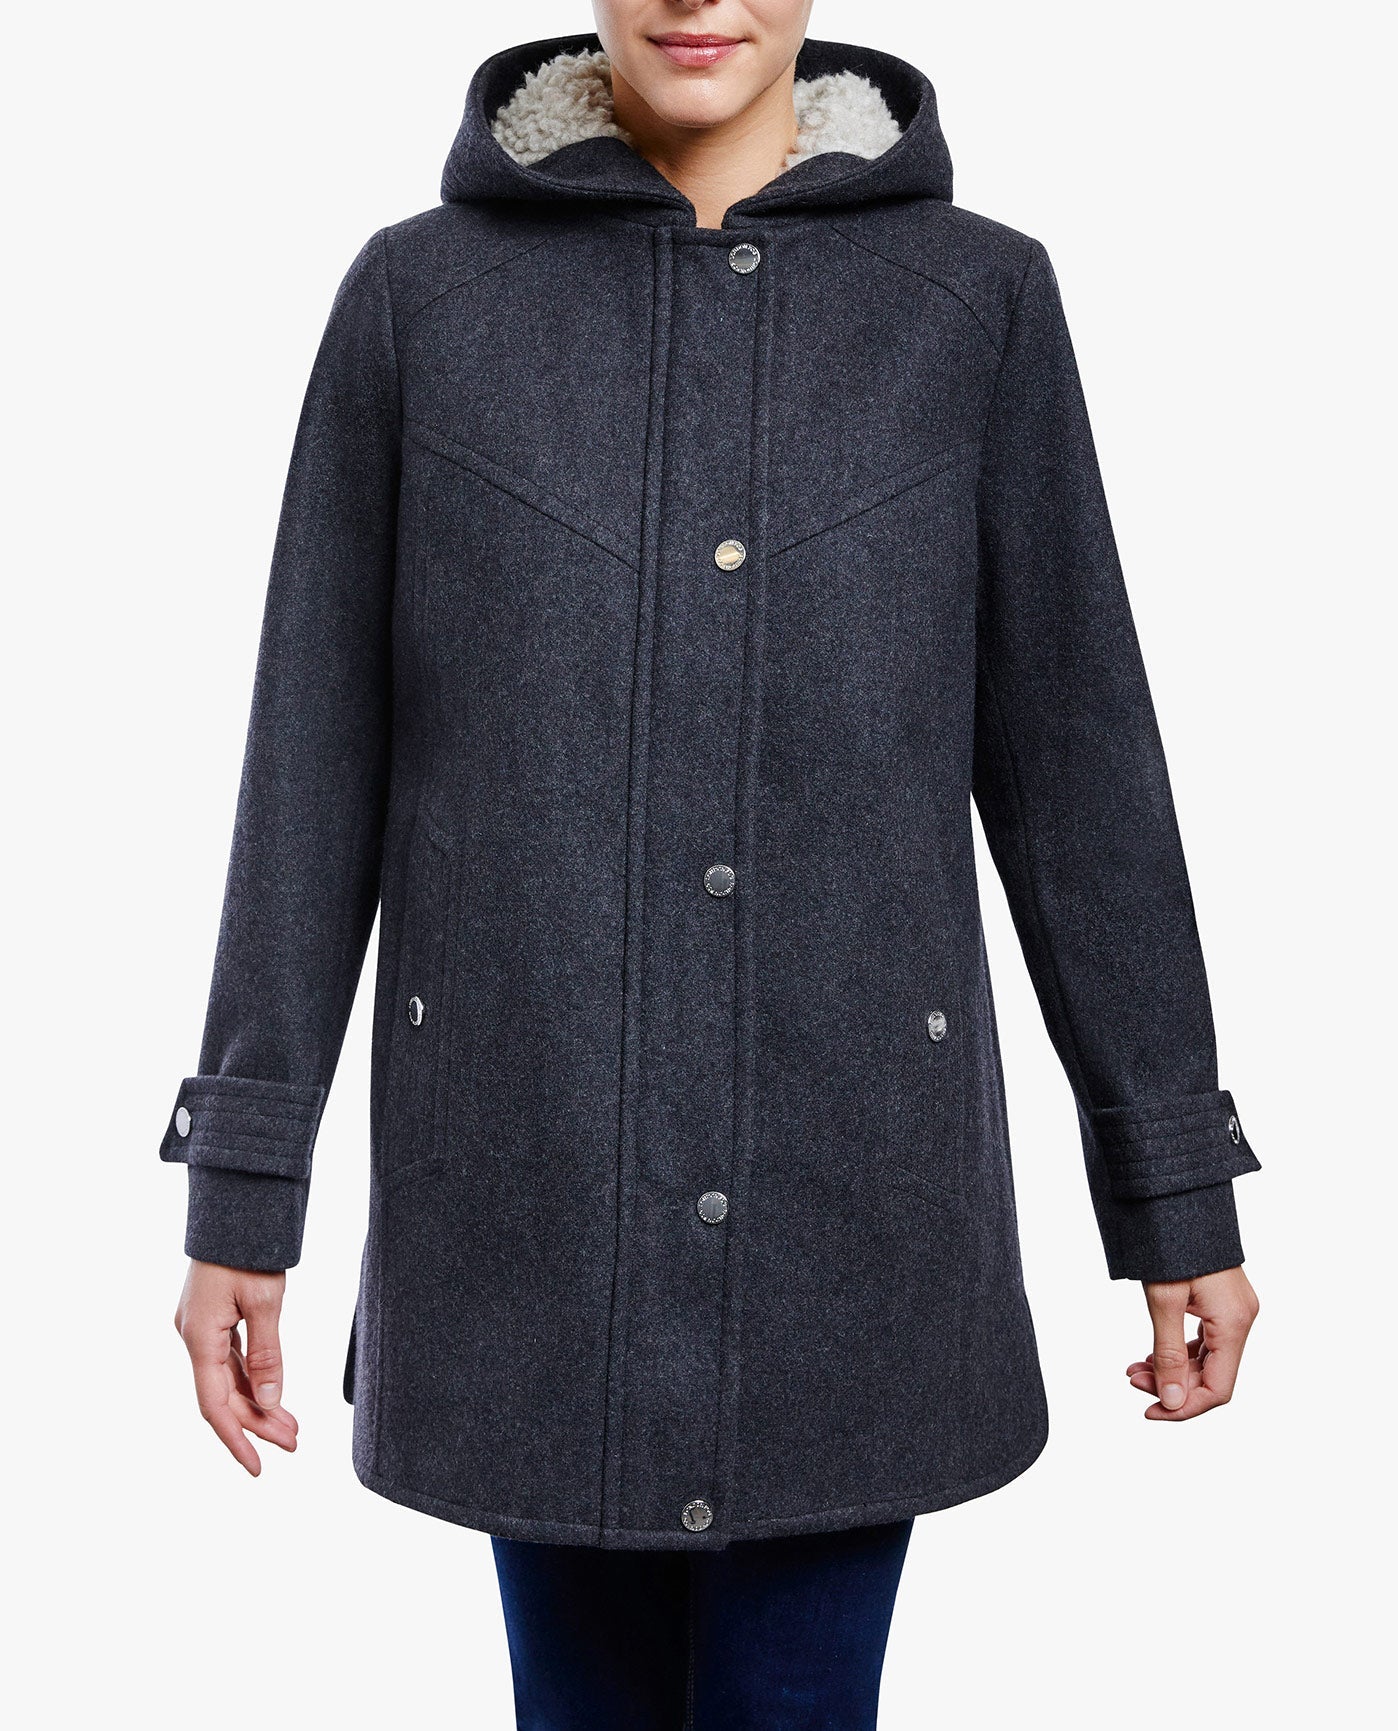 Closed View Of ZIP-FRONT SHERPA LINED HOOD 31 INCH WOOL JACKET | CHARCOAL